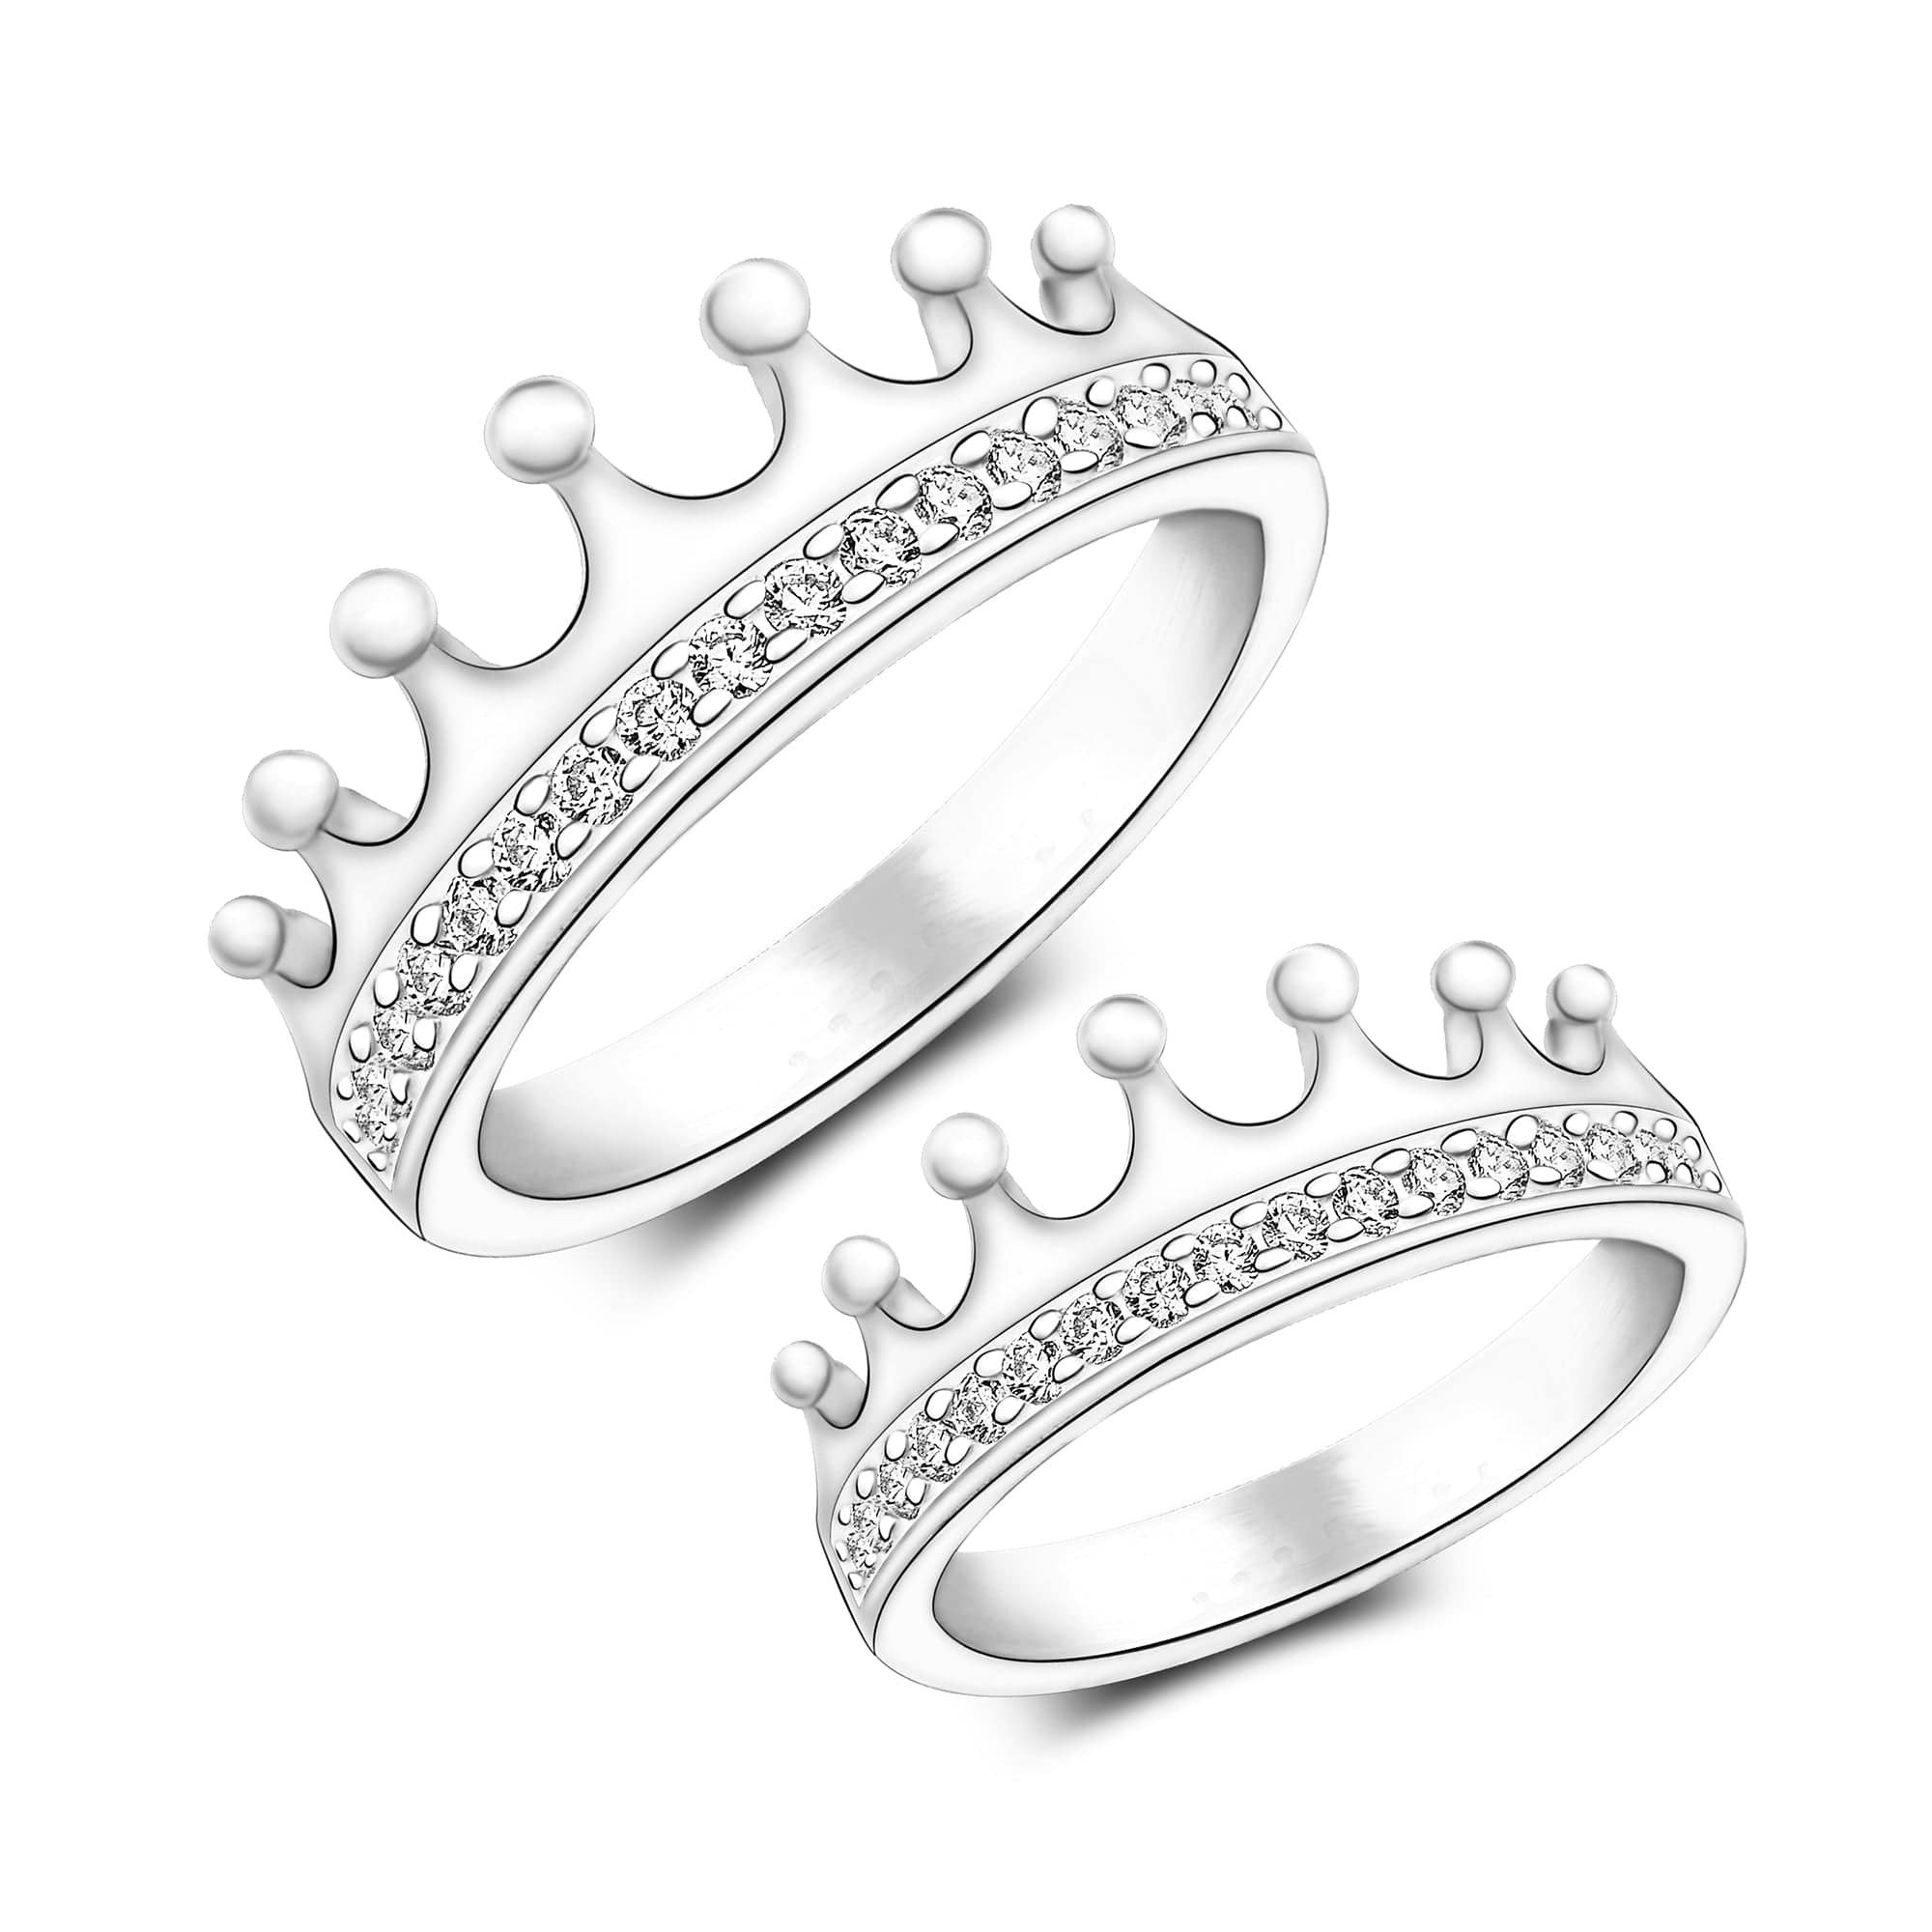 Buy Ailianer Princess Queen Crown Rings for Women Girl Heart-Shaped Ring  Size 5-10 Jewelry Silver Plated Zircon (5) at Amazon.in